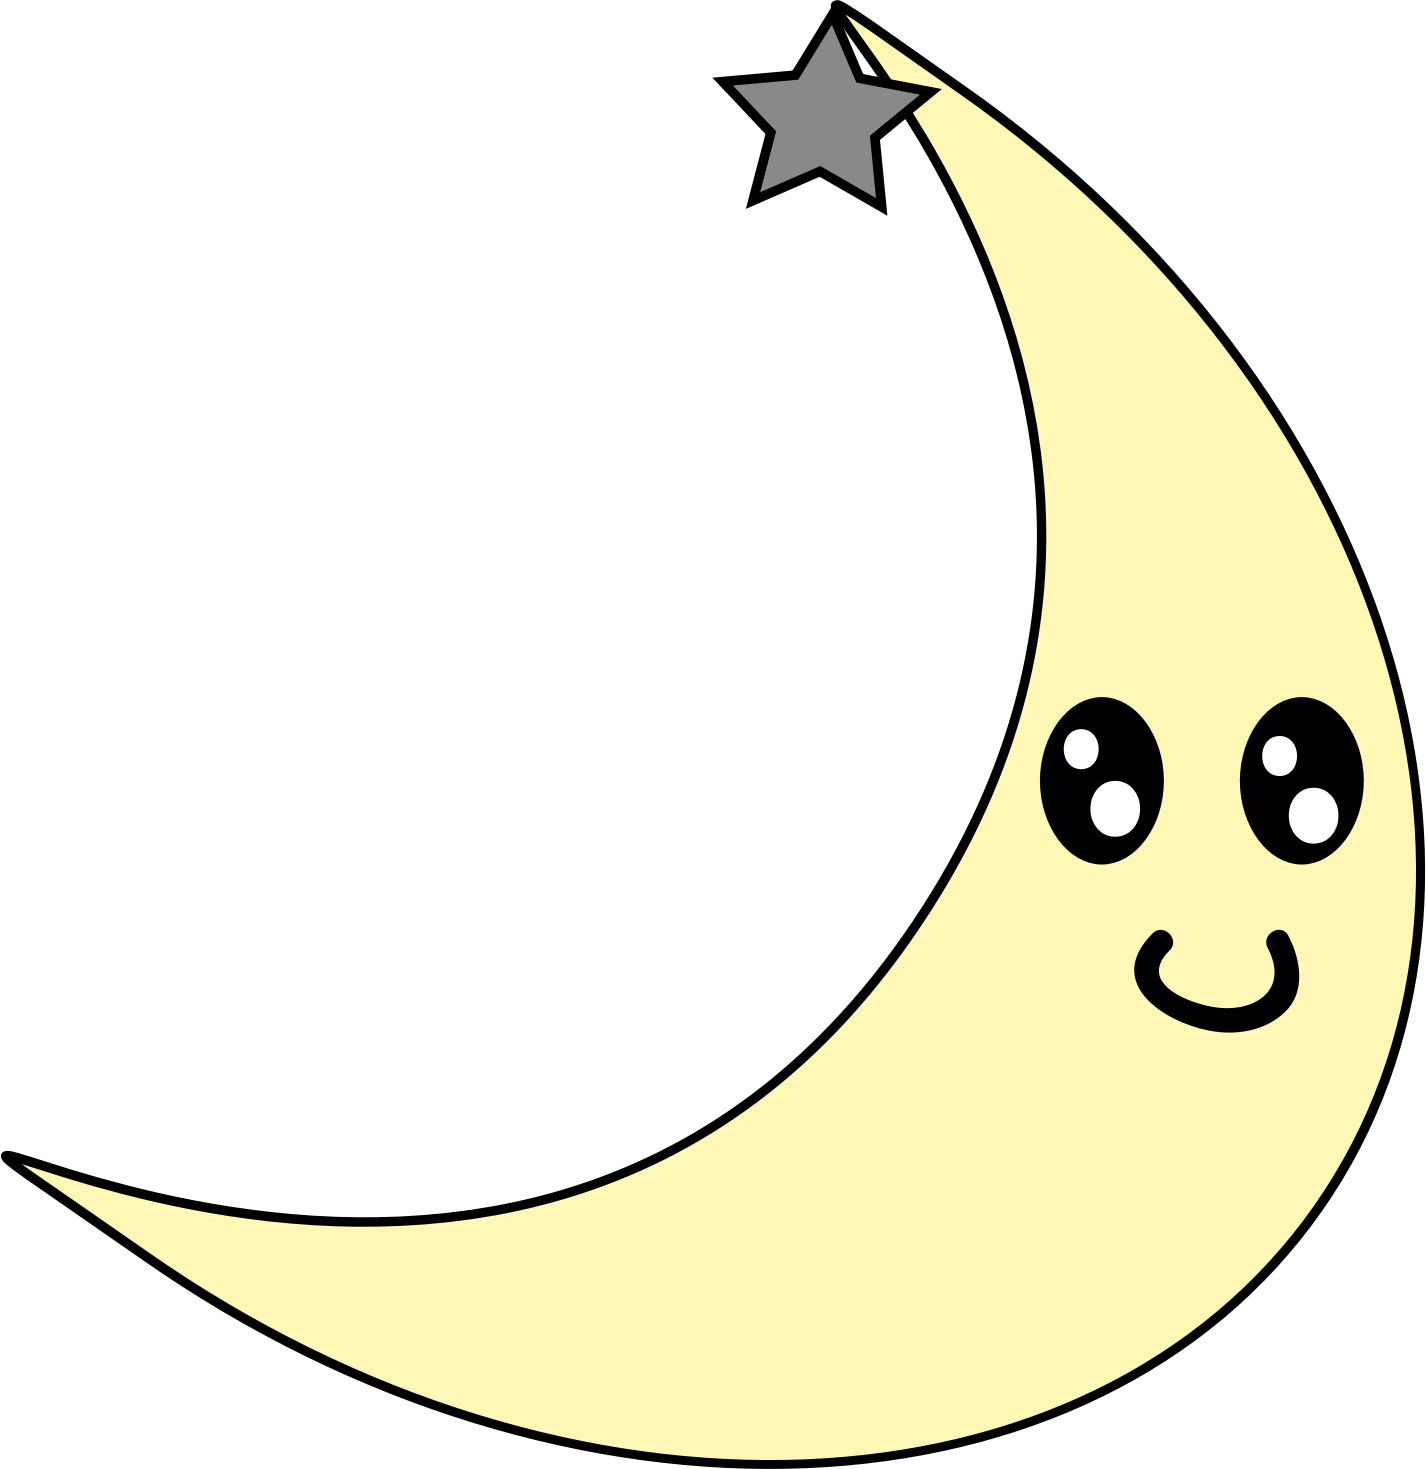 Clipart moon cute, Clipart moon cute Transparent FREE for download on WebStockReview 2020